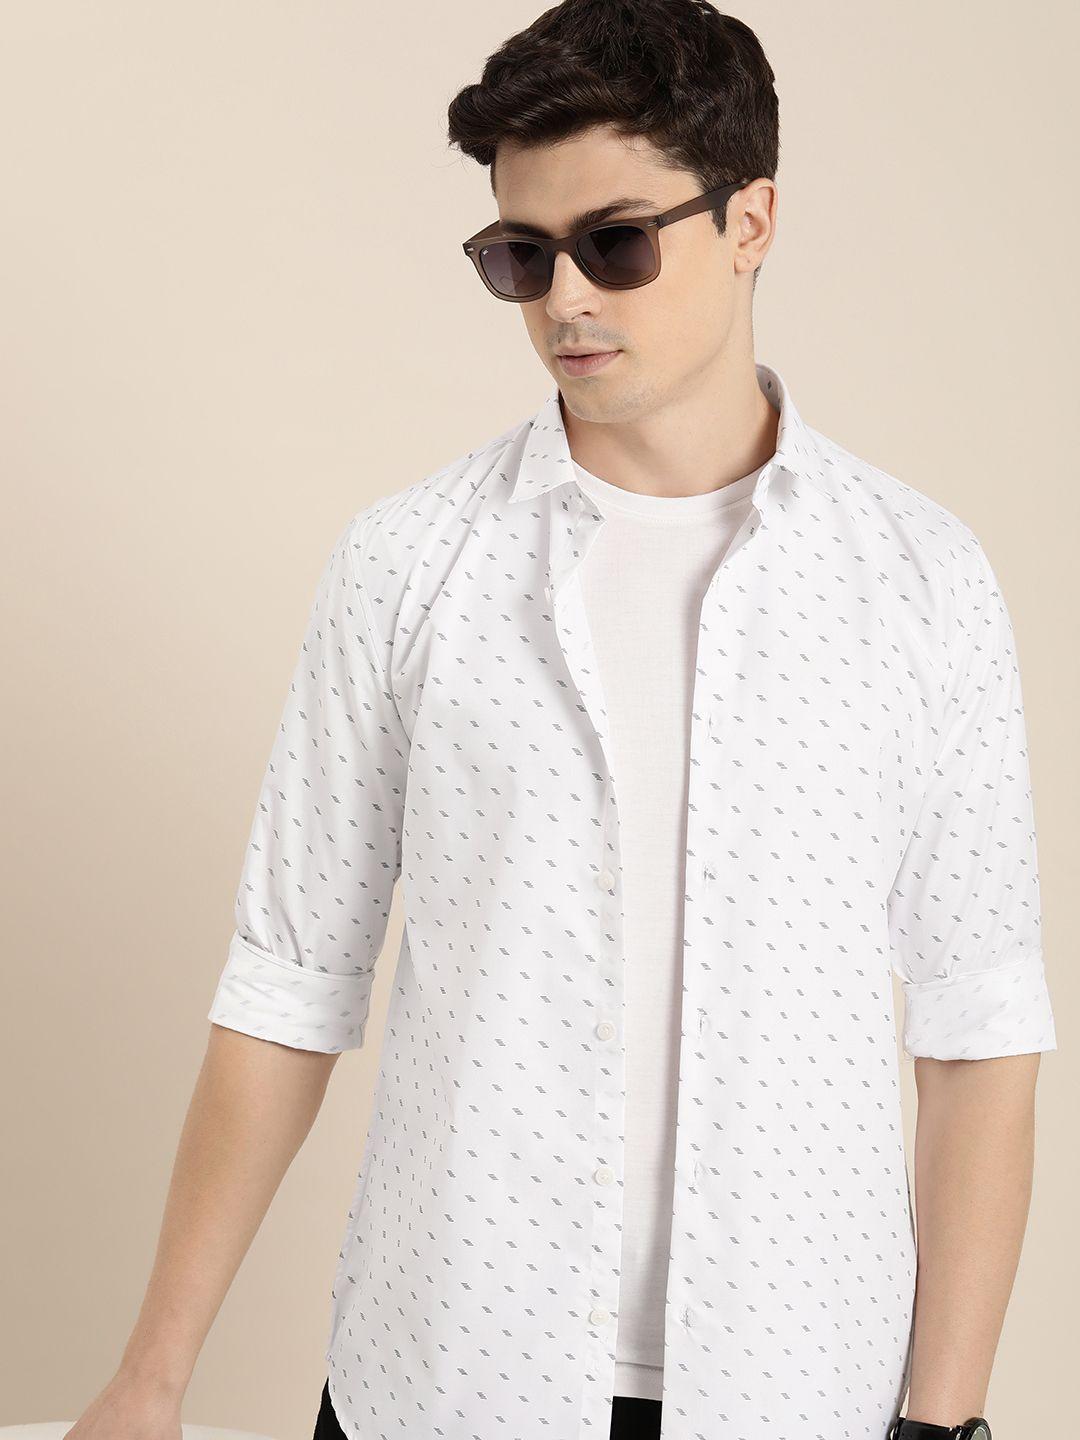 encore by invictus printed casual shirt